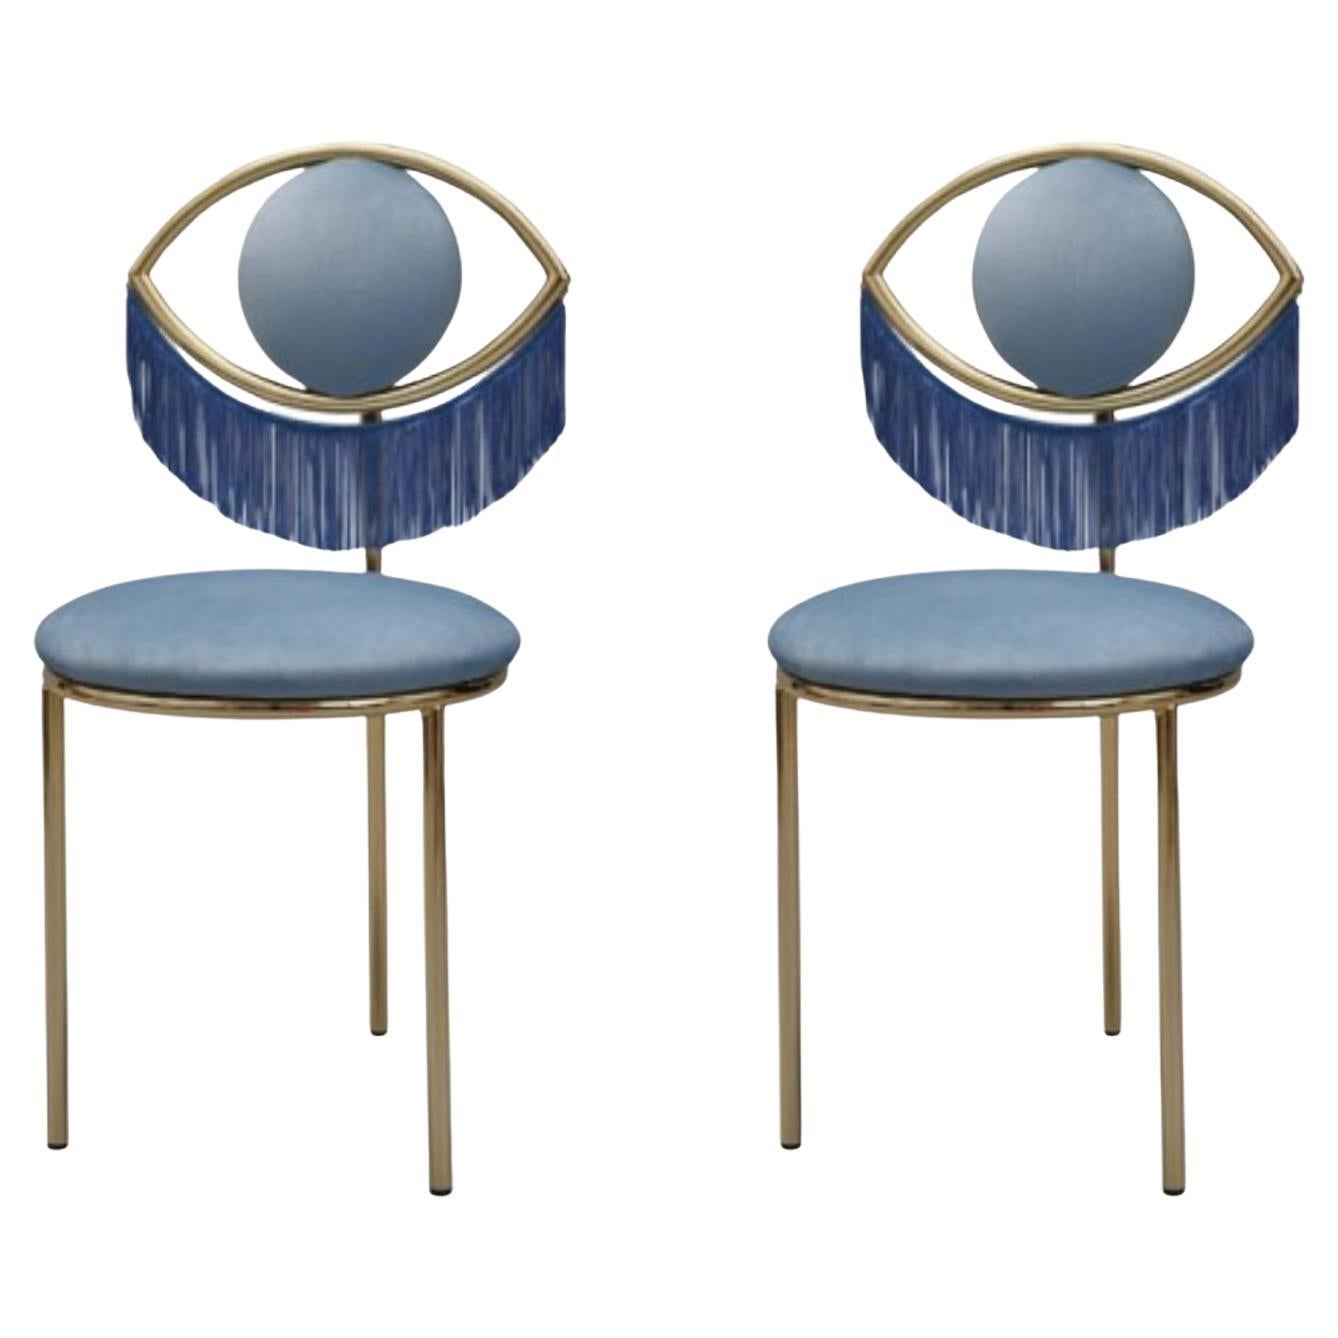 Set of 2 Wink Chairs by Masquespacio